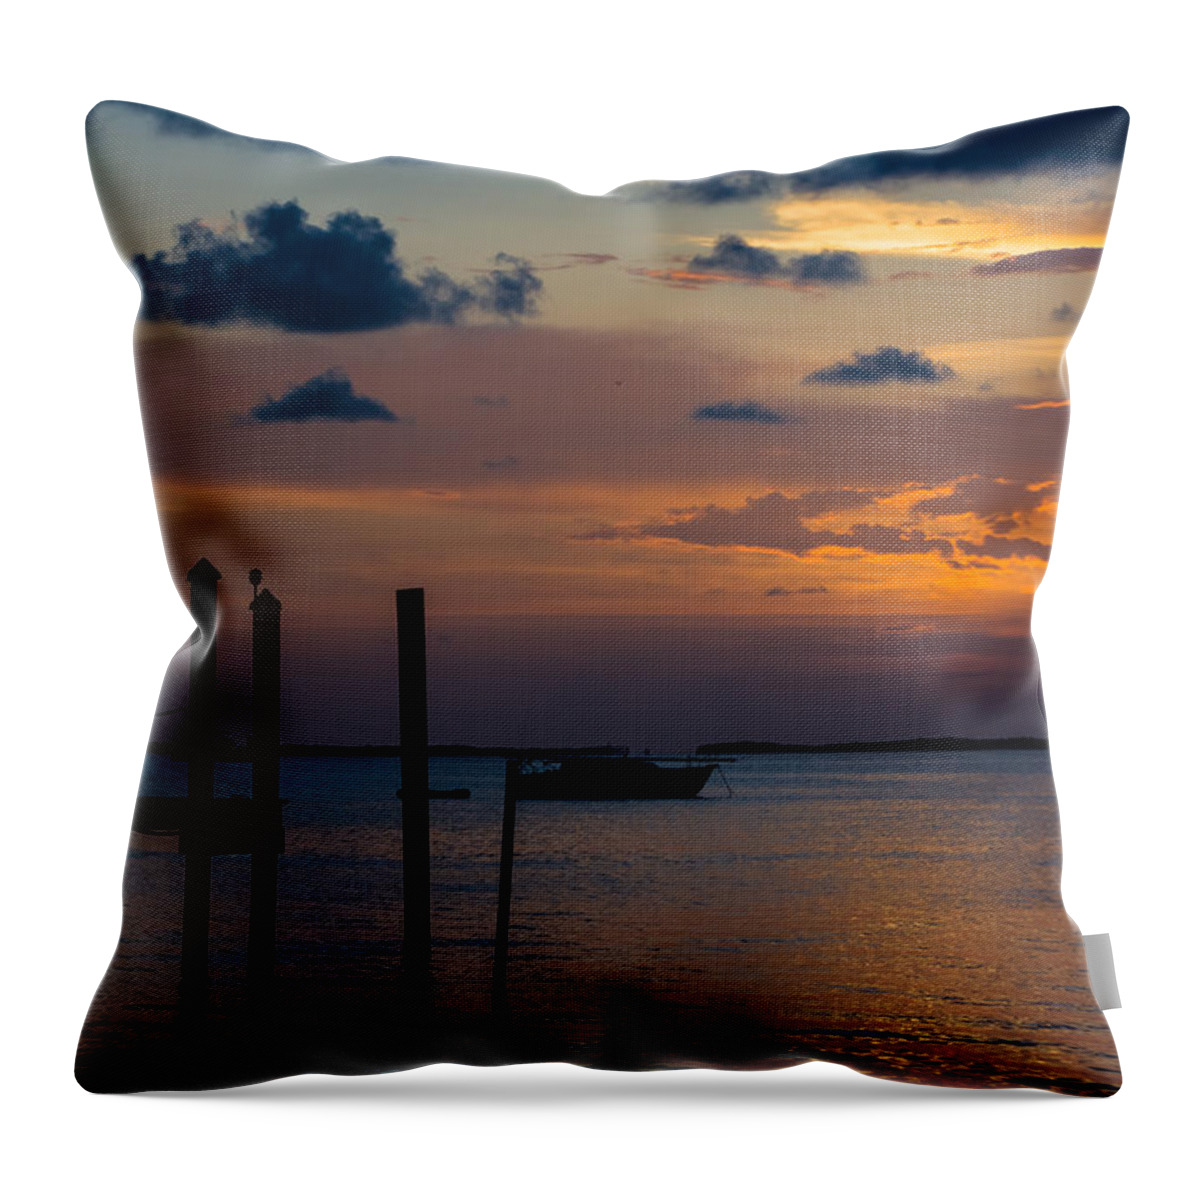 Anchored Throw Pillow featuring the photograph Pier at Buttonwood Sound by Ed Gleichman